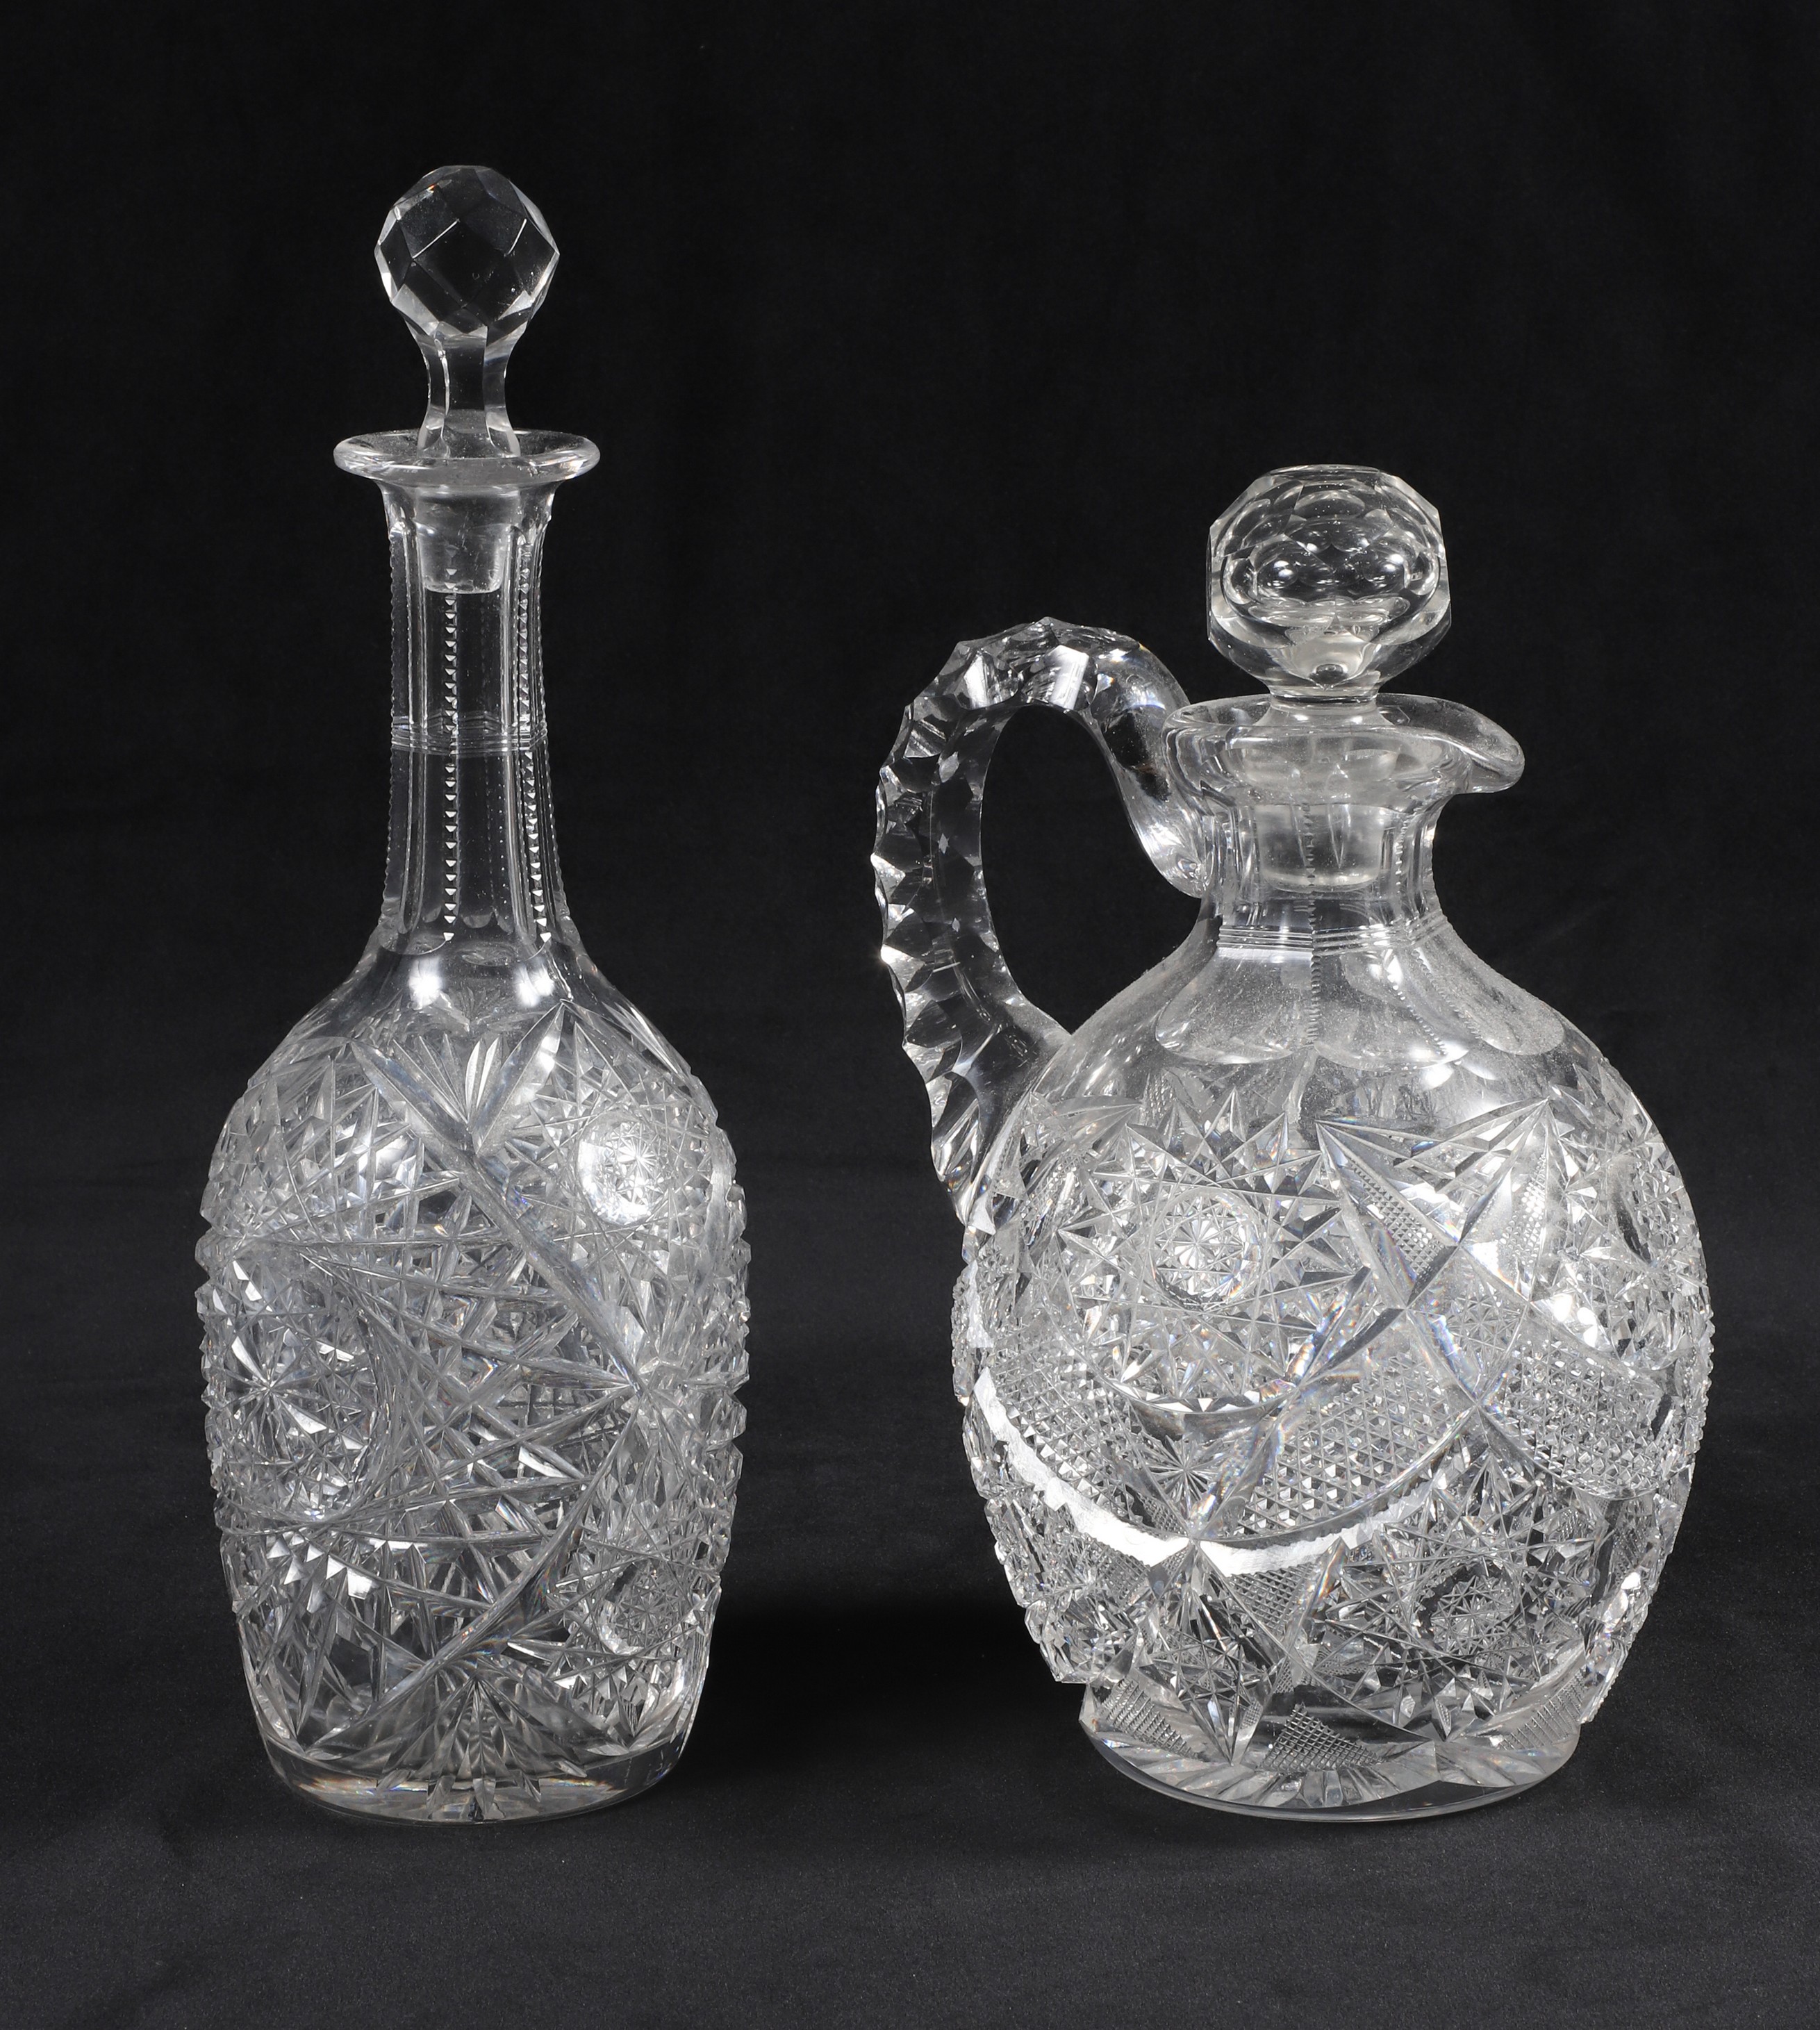  2 ABCG decanters to include cut 2e15c8